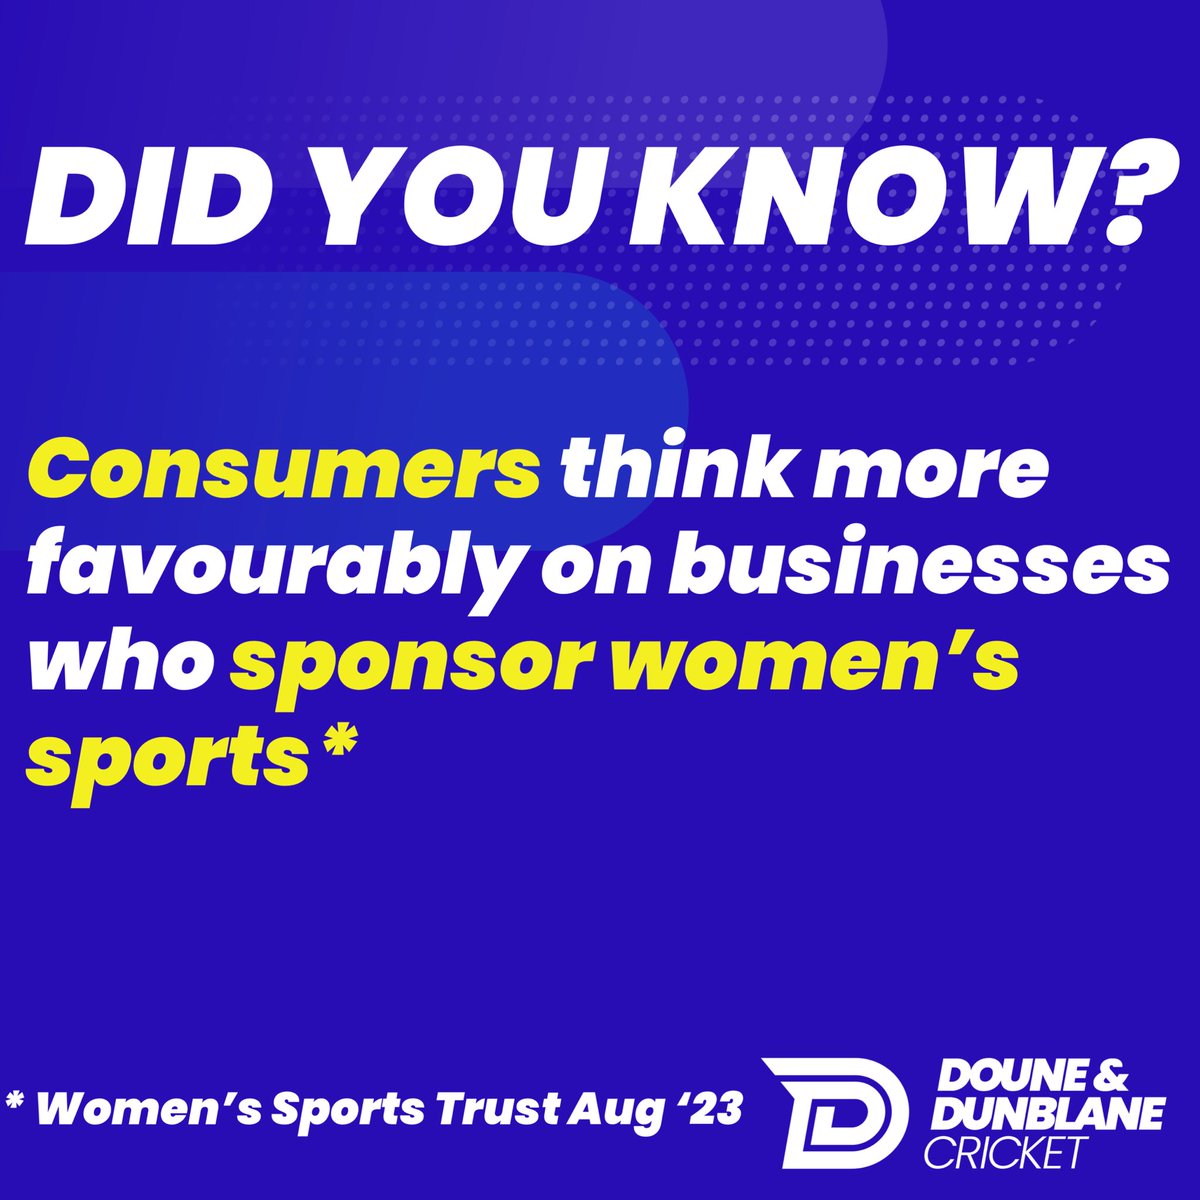 If you would like more information regarding sponsoring the only Women’s cricket team in Stirling & Clackmannanshire send us a message! #doune #Dunblane #cricket #womeninbusiness #womenscricket